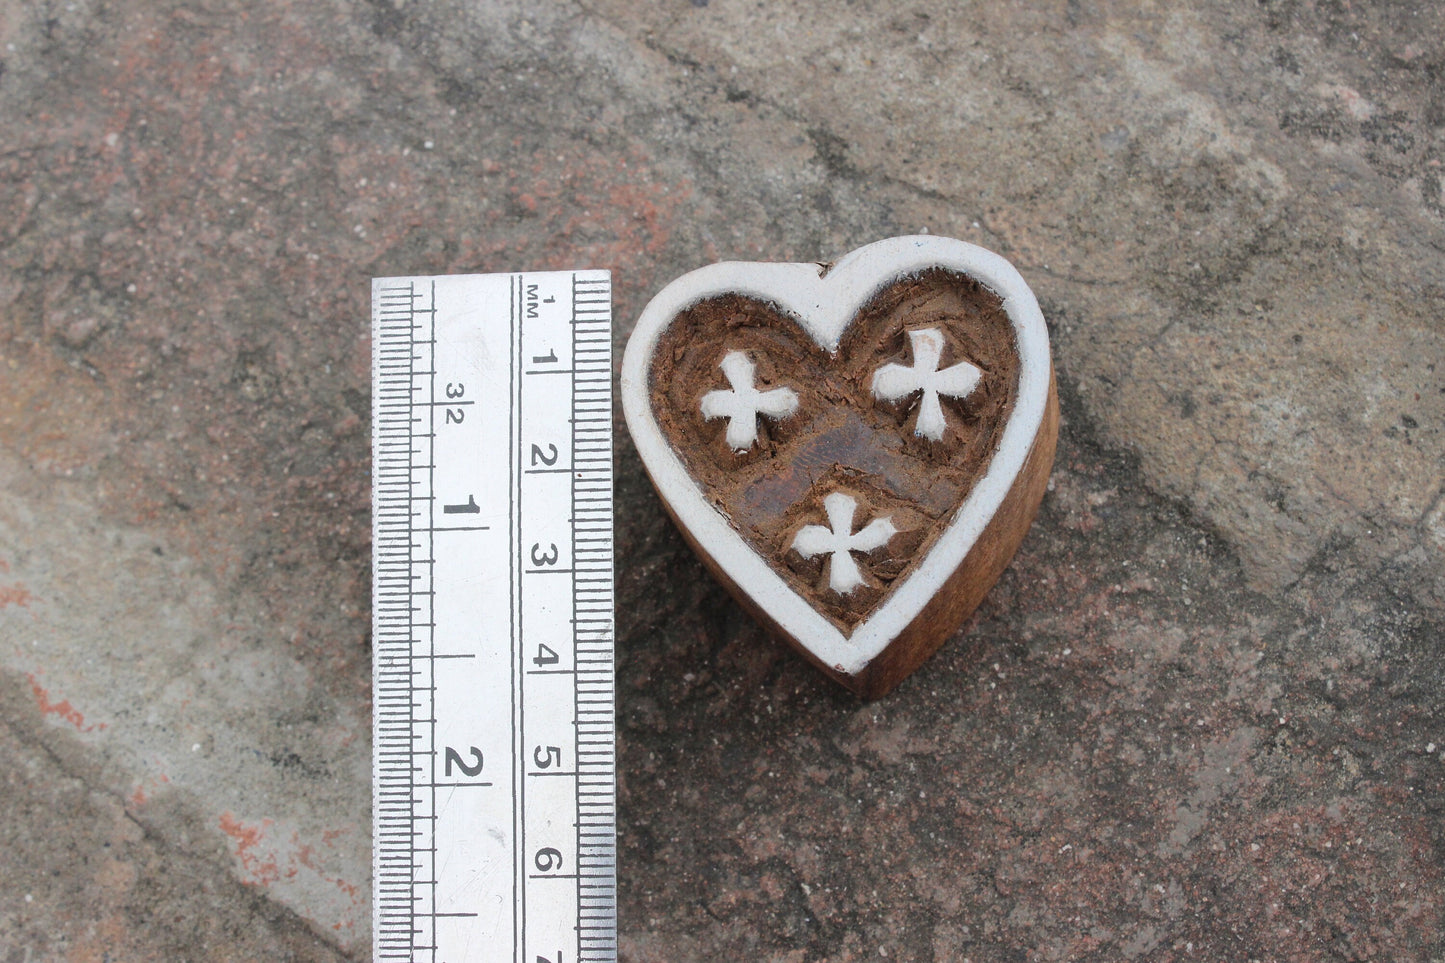 Heart Fabric Block Print Stamp Love Block Print Stamp Hand Carved Block Stamp Indian Textile Printing Block For Printing Dotted Soap Stamp